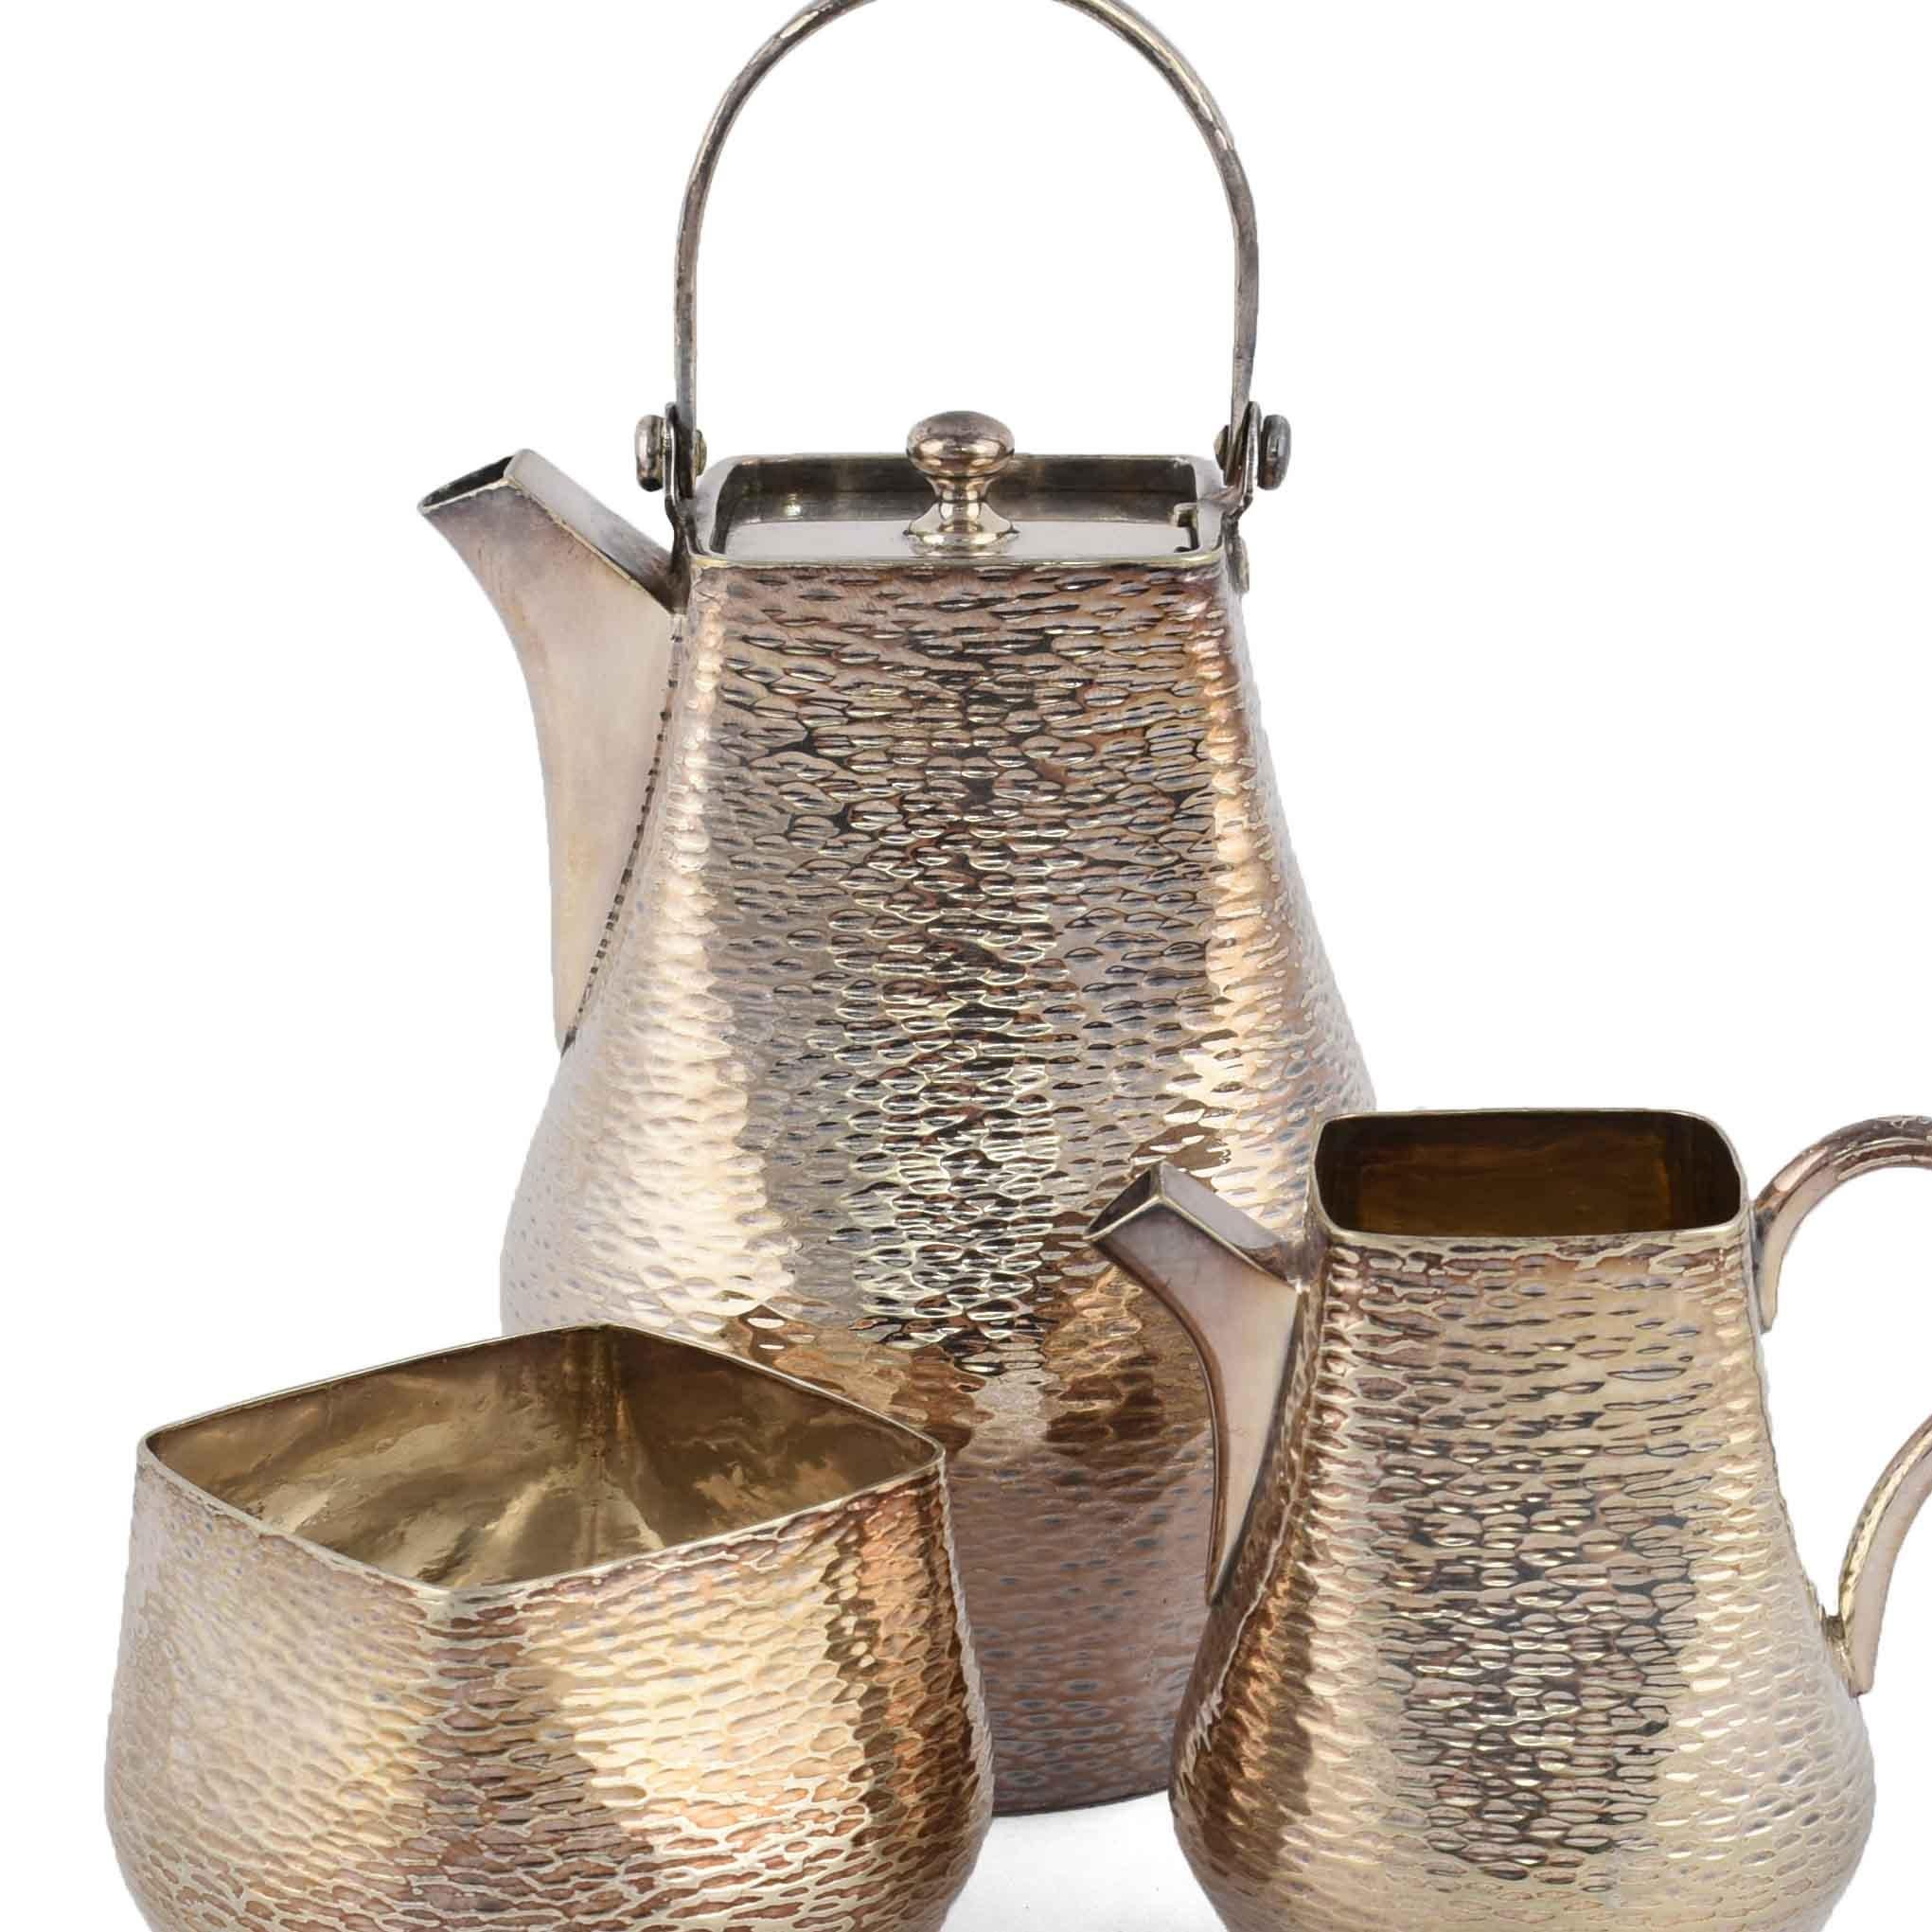 Silver plated Moka set is an original decorative group of objects realized in the first half of the 20th century.

Created and realized by William Hutton & Sons.

Original silver plated metal. The set includes: one coffee pot (H. 17.5 cm), one